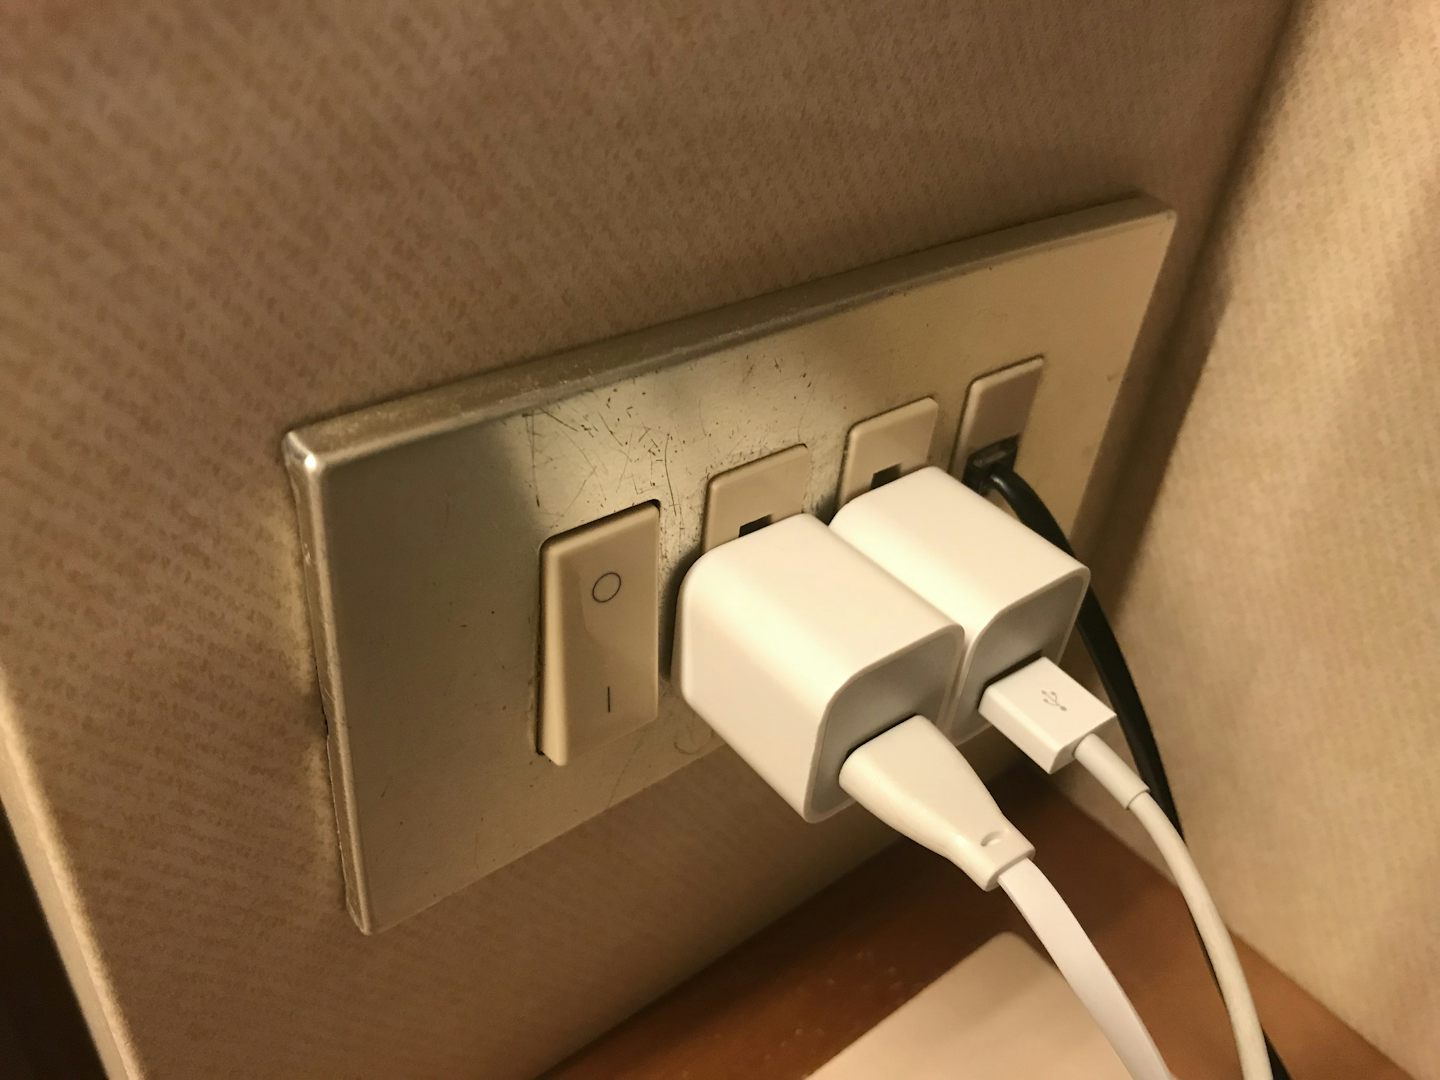 The only accessible (usable) electrical outlet in the room next to the desk